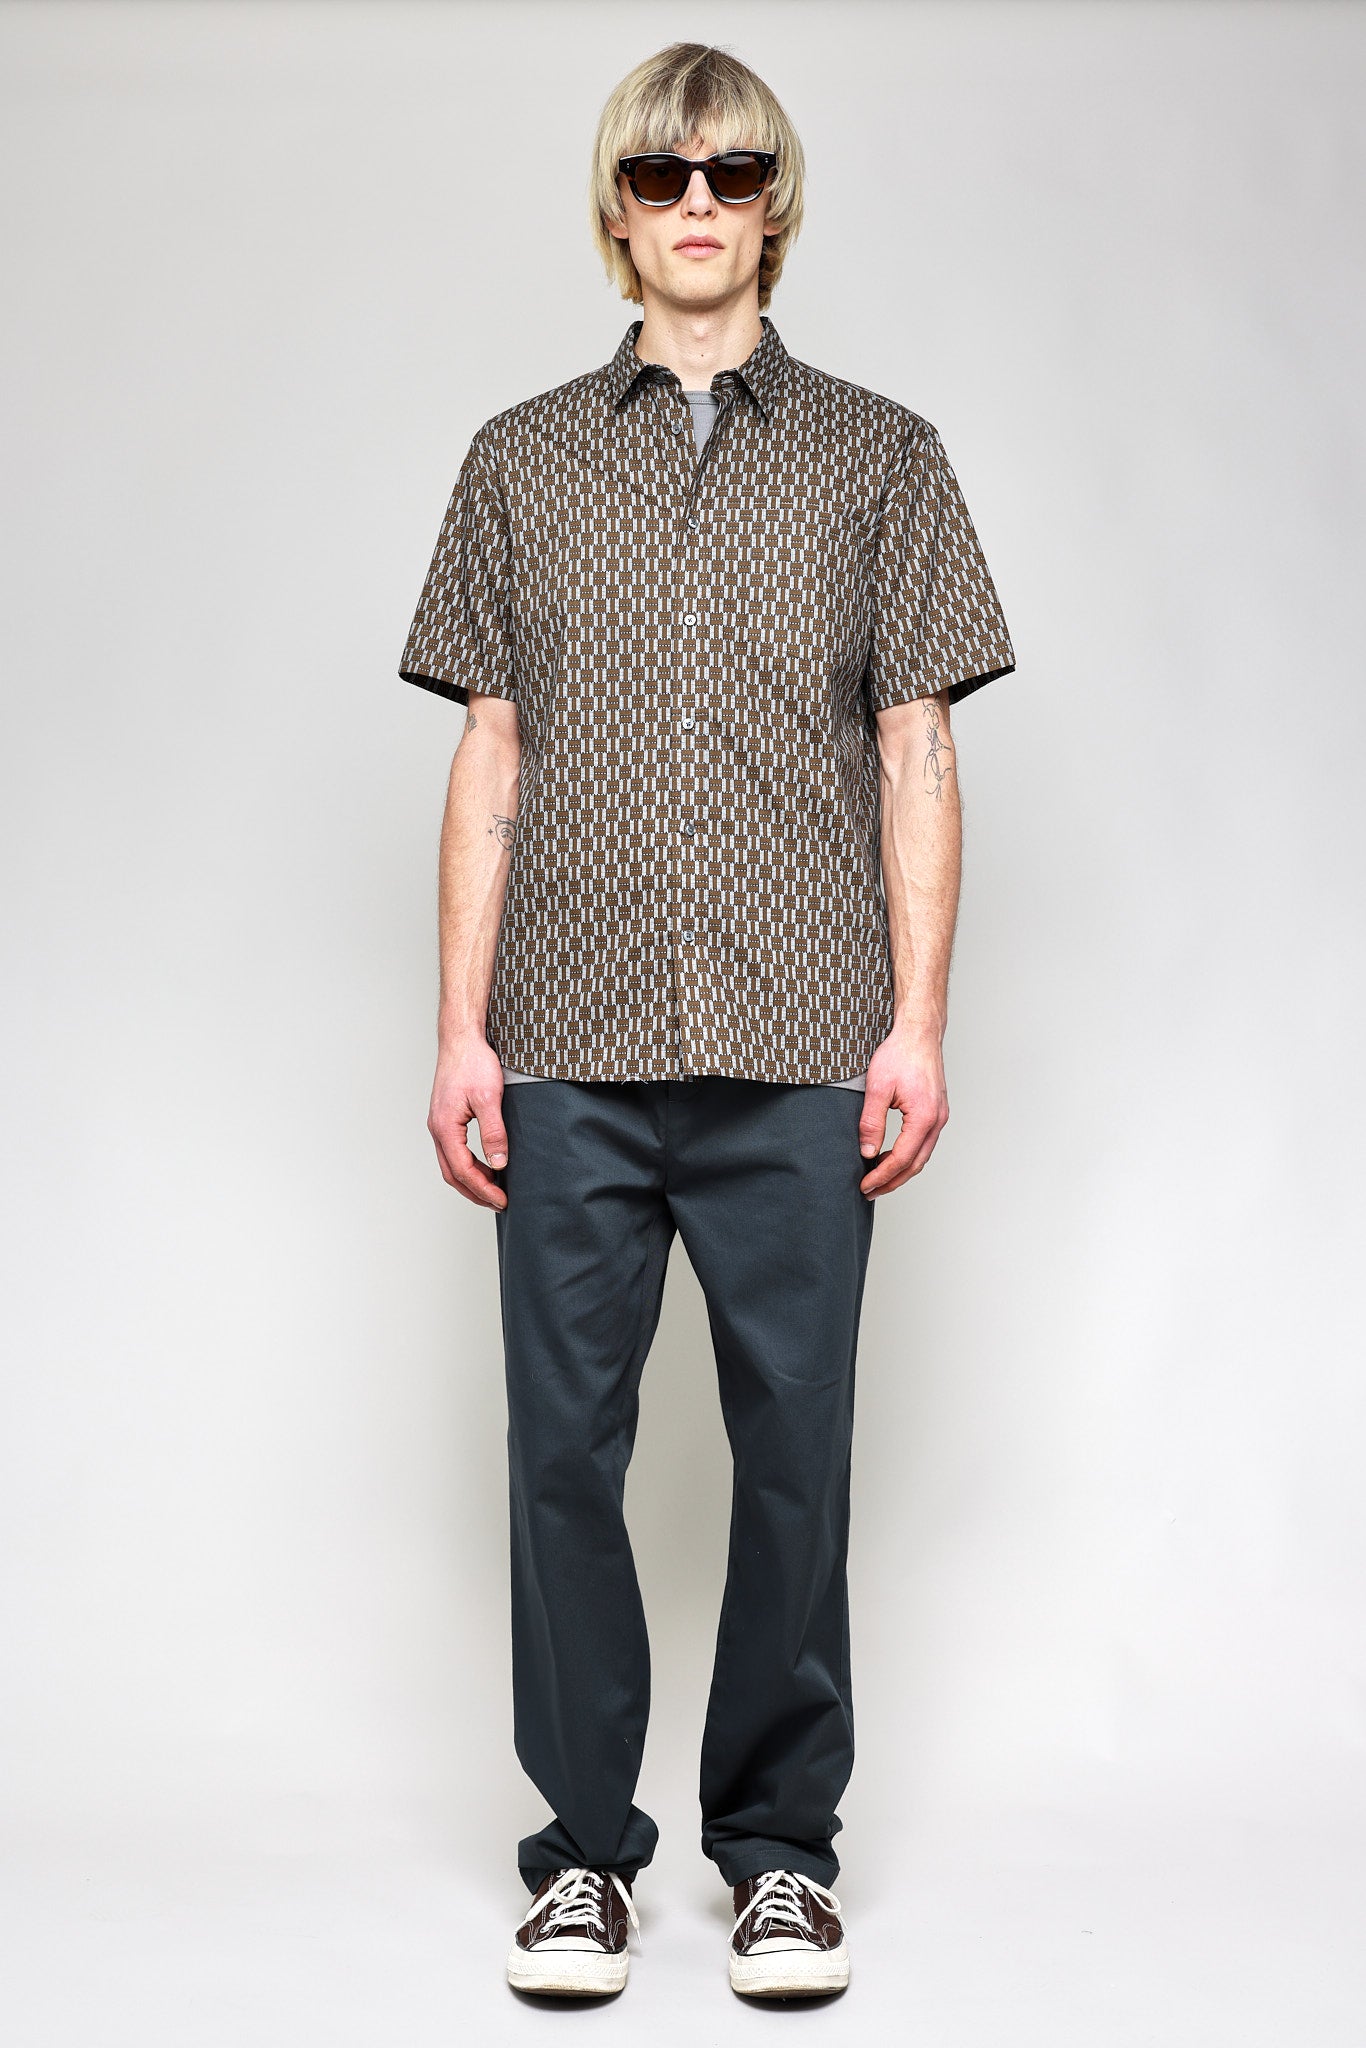 Japanese Graphic Grid Print in Khaki and Blue 05